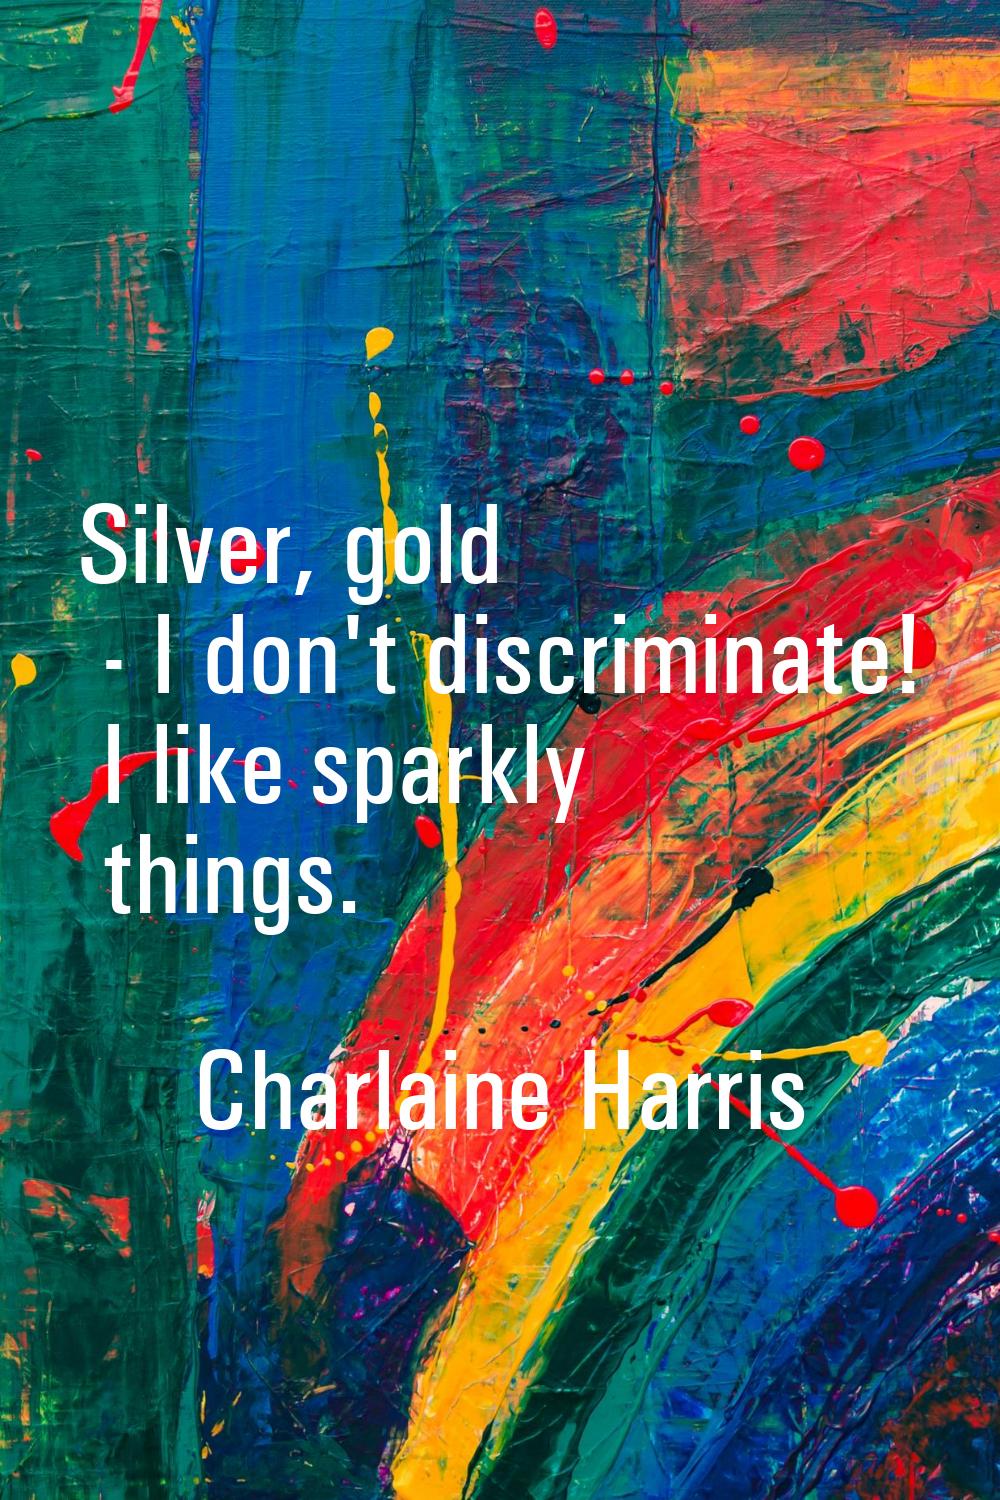 Silver, gold - I don't discriminate! I like sparkly things.